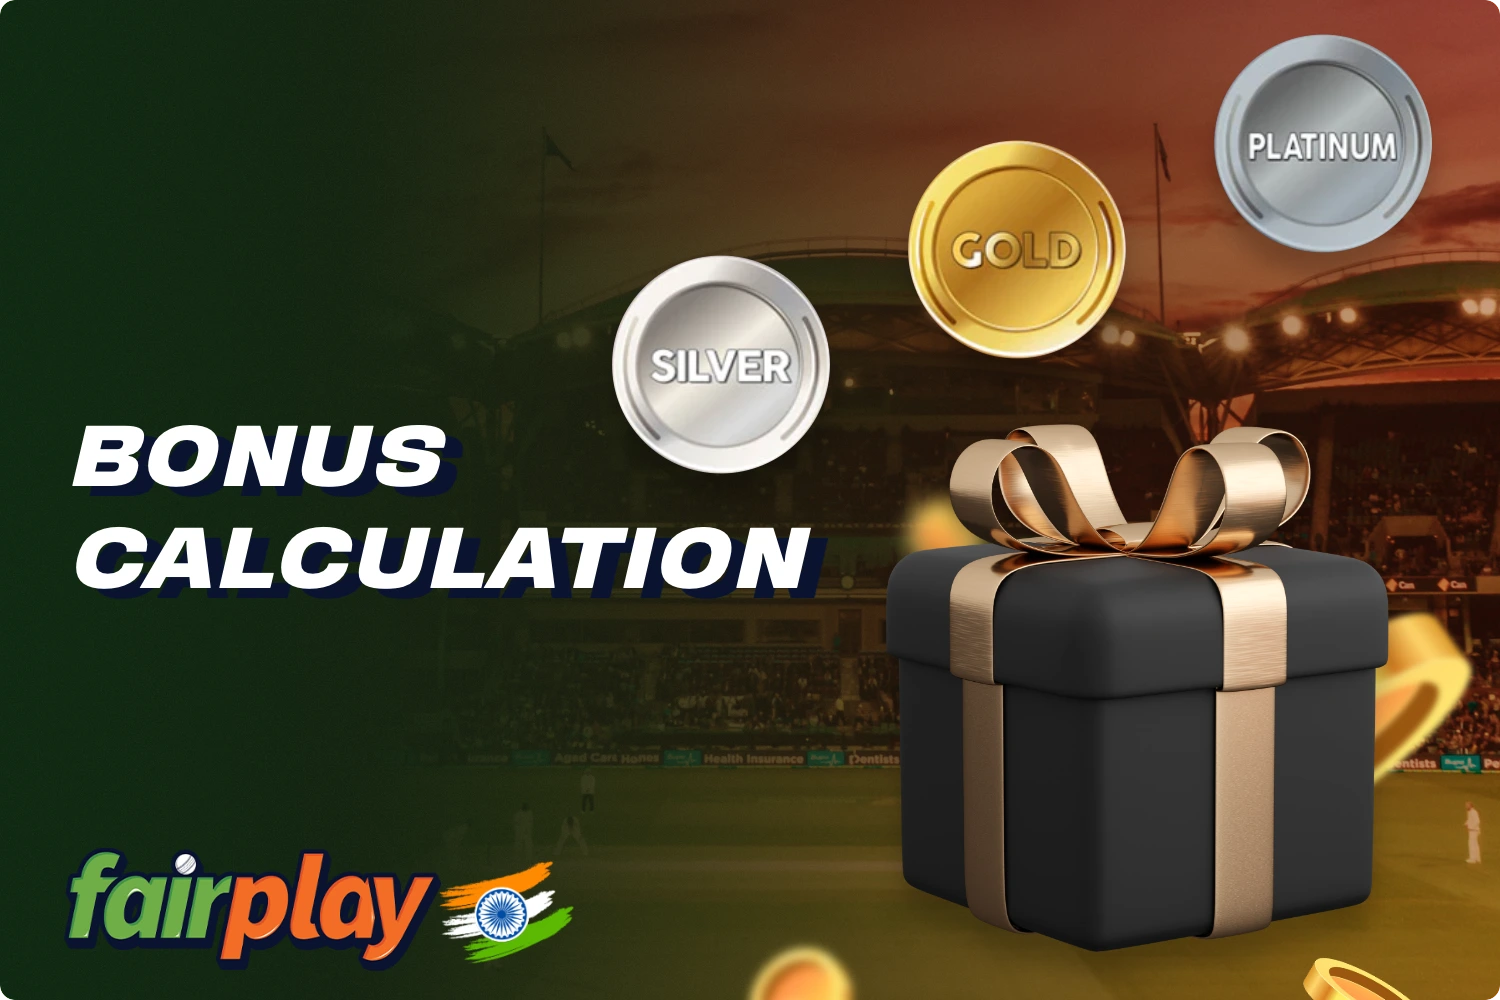 By increasing their loyalty level, a Fairplay user will receive a higher bonus